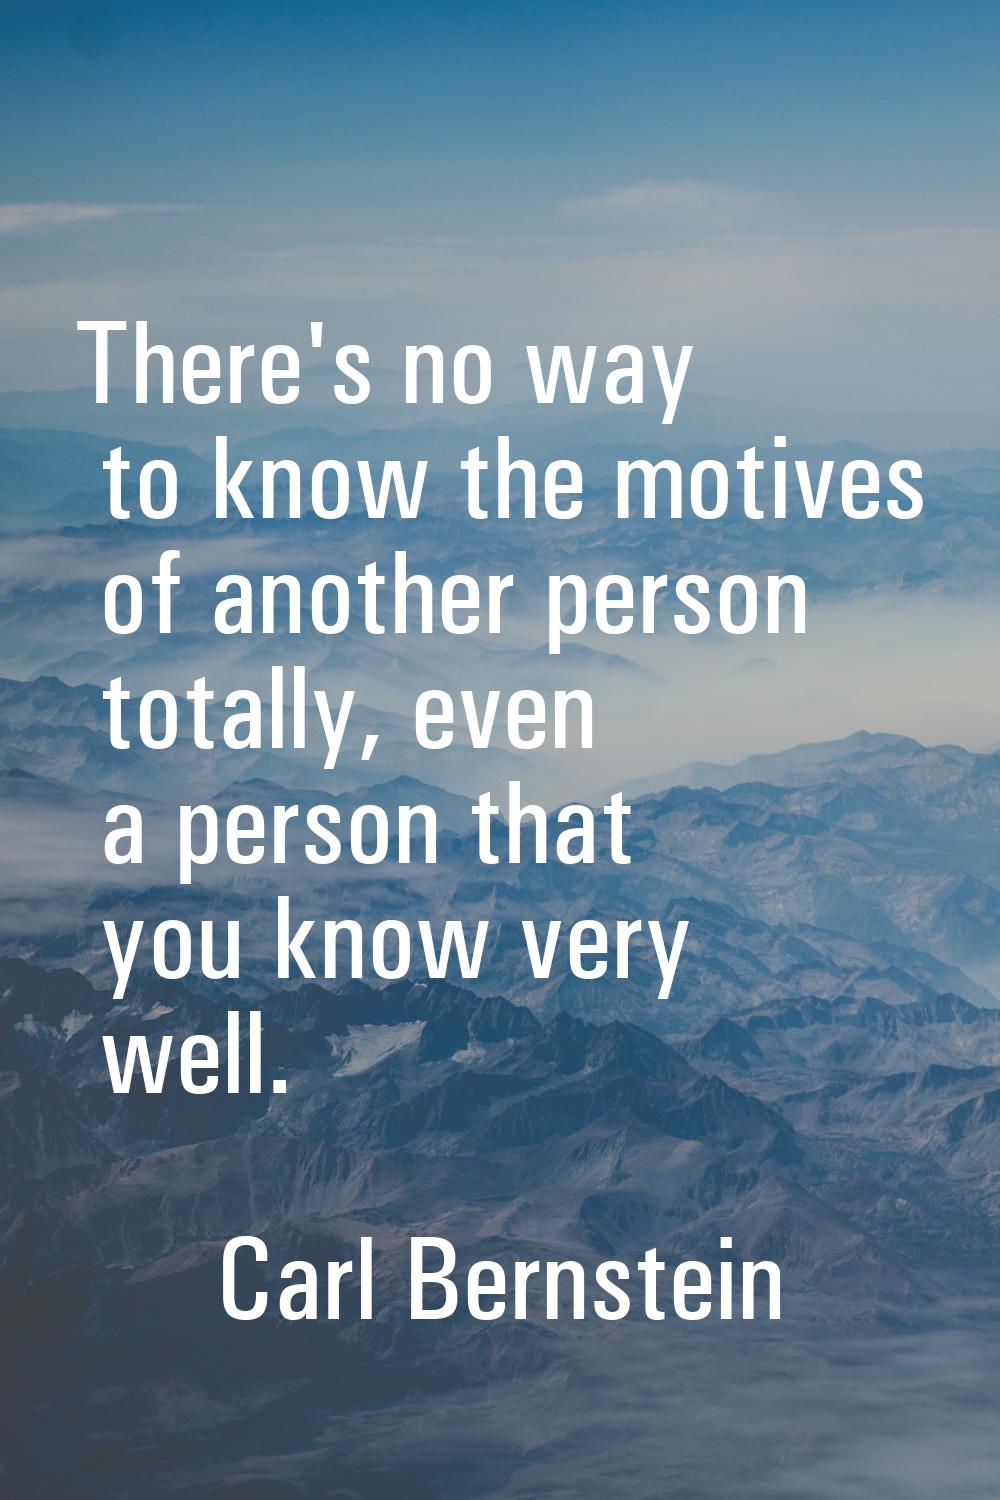 There's no way to know the motives of another person totally, even a person that you know very well